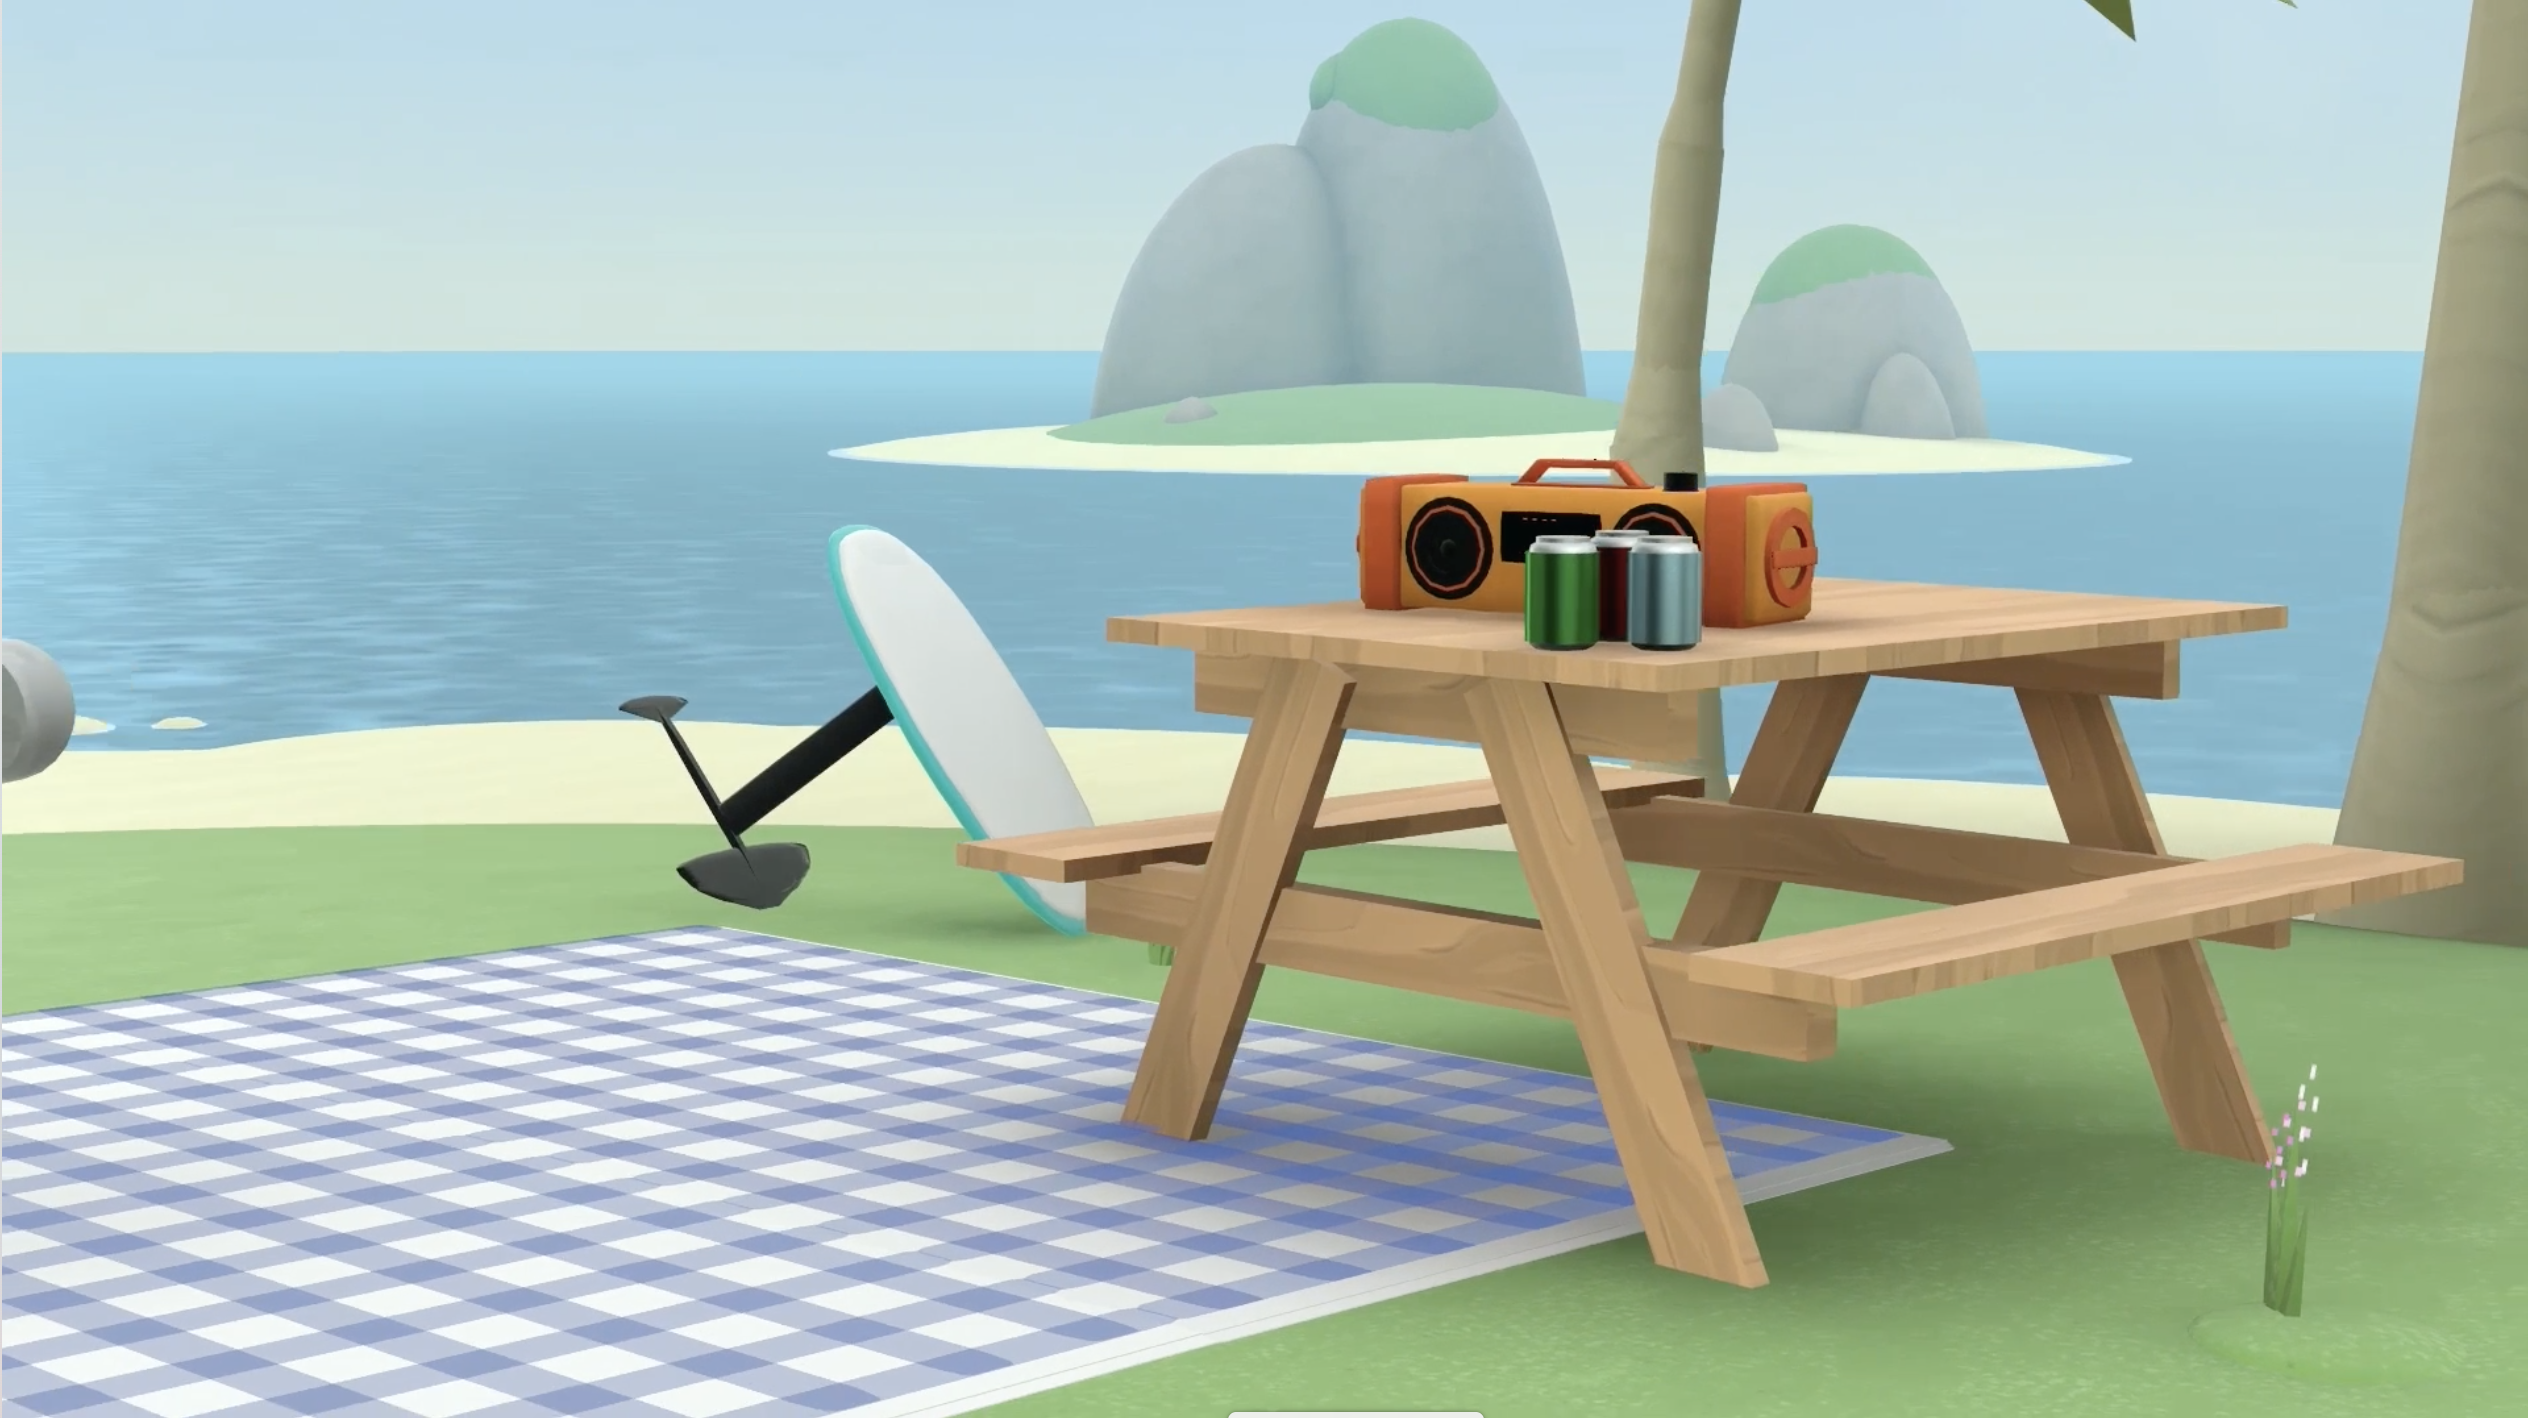 A 3D beach environment with a picnic table and hydrofoil.